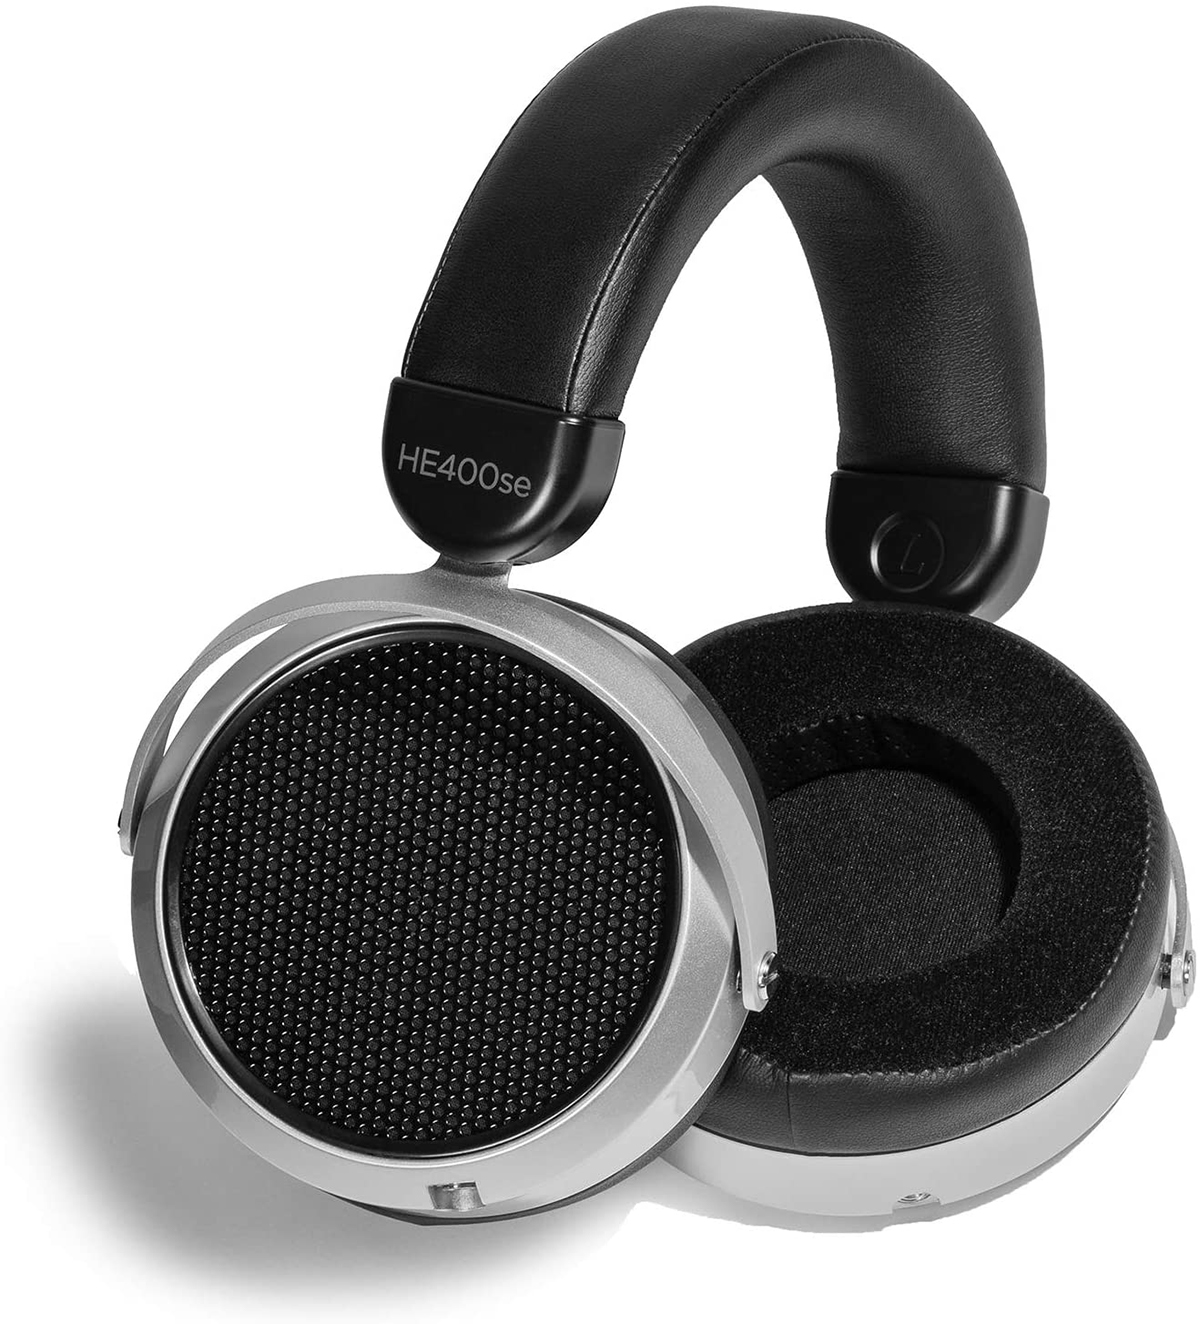 HIFIMAN HE400se Planar Magnetic Headphone close-up against a white background